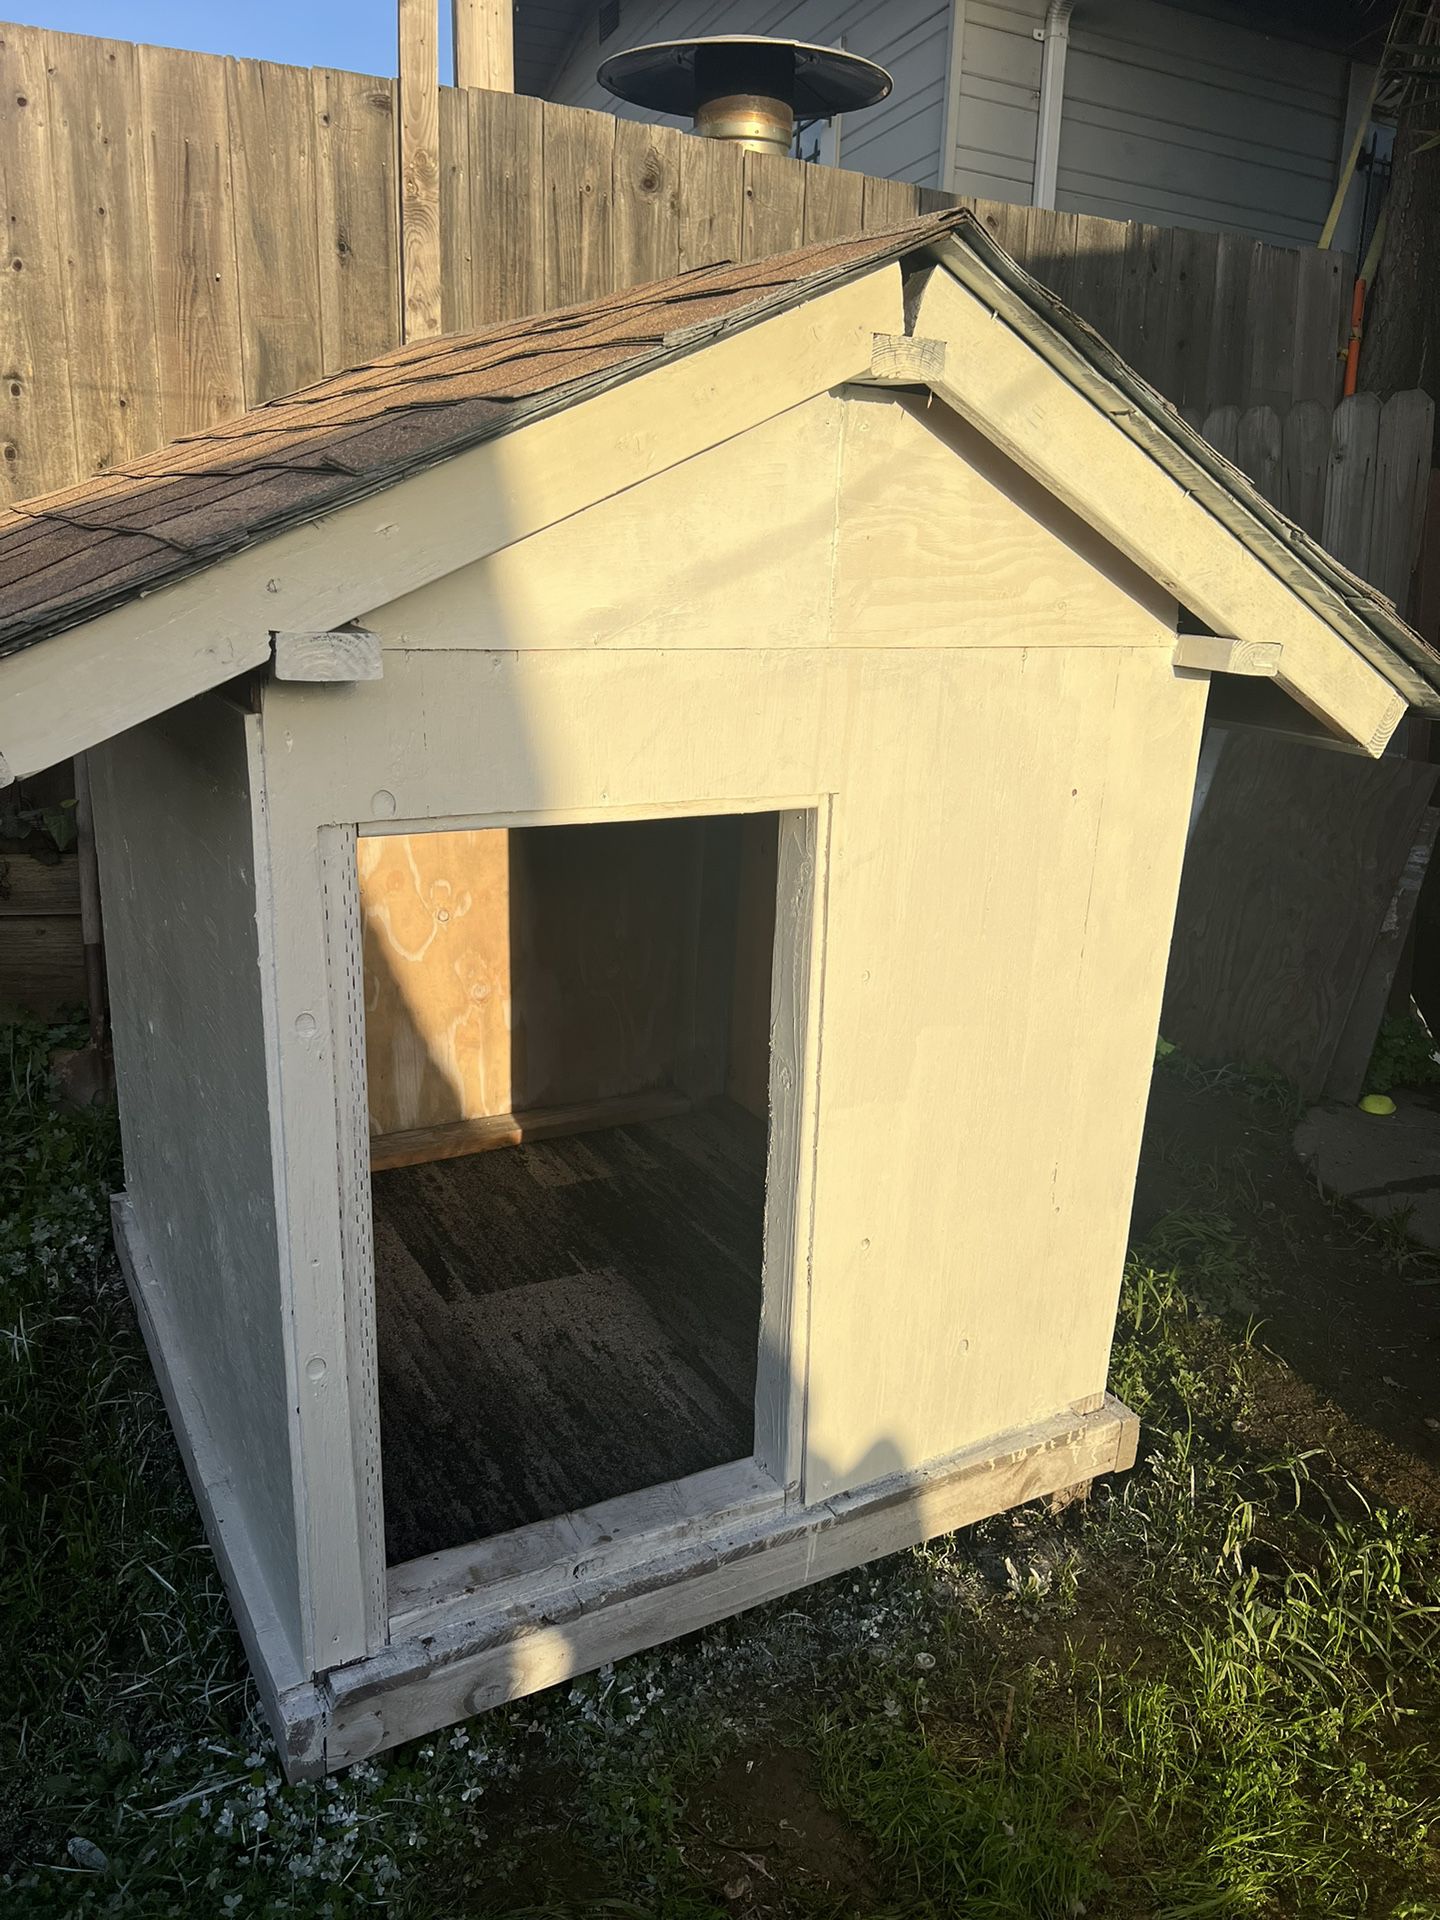 DOG HOUSE FOR SMALL TO X LARGE DOG